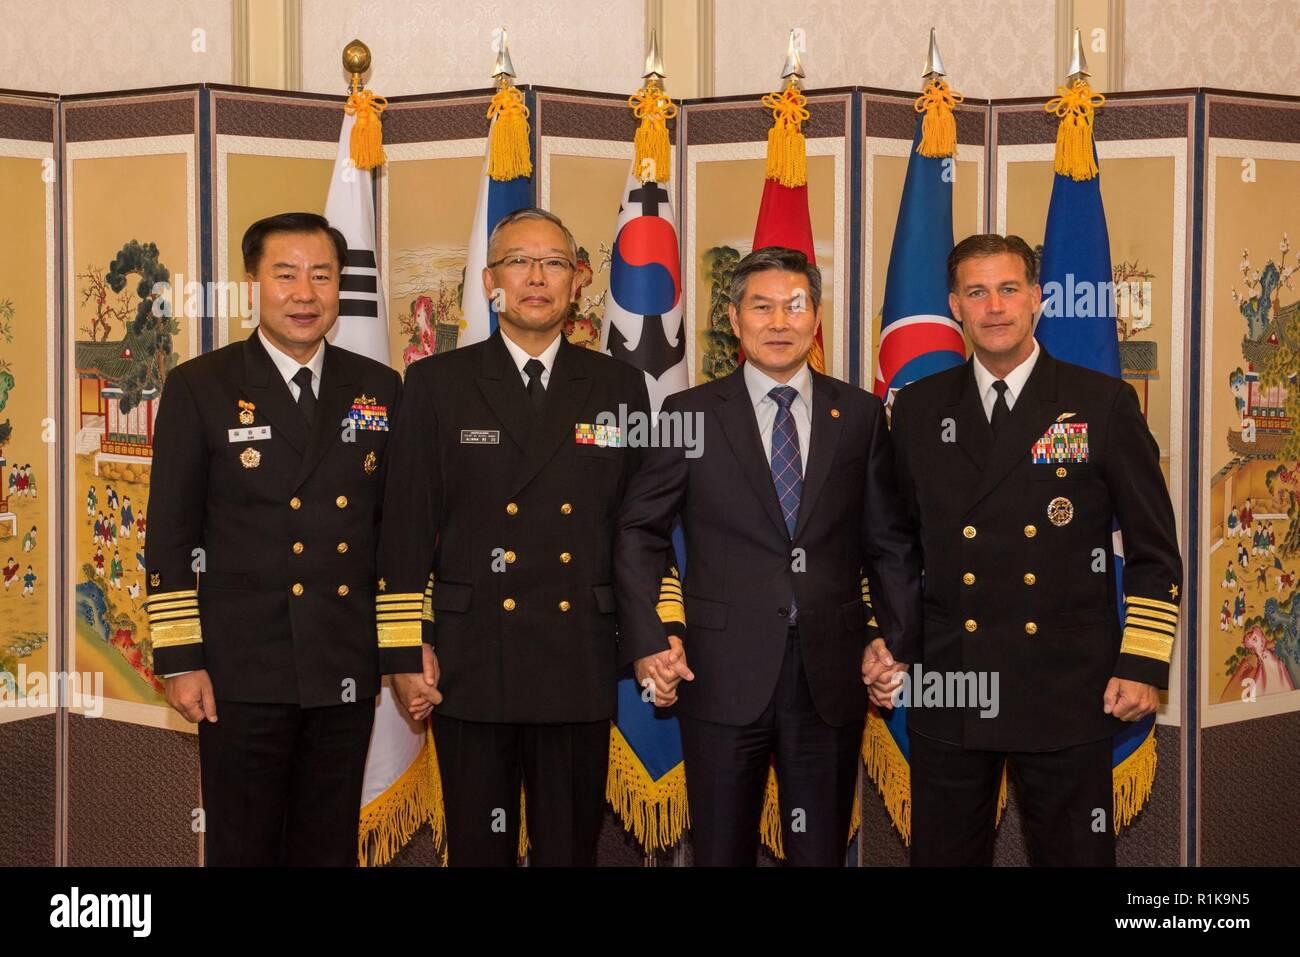 JEJU ISLAND, Republic of Korea, Republic of Korea (Oct. 12, 2018) Minister Jeong, Kyeong-doo, Republic of Korea (ROK) Minister of National Defense (right center), ROK Navy Chief of Naval Operations Adm. Sim, Seung-seob (left), Adm. Yutaka Murakawa, chief of maritime staff for Japan Maritime Self-Defense Force (left center), and Adm. John Aquilino, commander, U.S. Pacific Fleet (right), pose for a group photo during an office call in Jeju. Aquilino is visiting the ROK to observe the 2018 ROK International Fleet review as well as attend the 2018 Western Pacific Naval Symposium being hosted by th Stock Photo